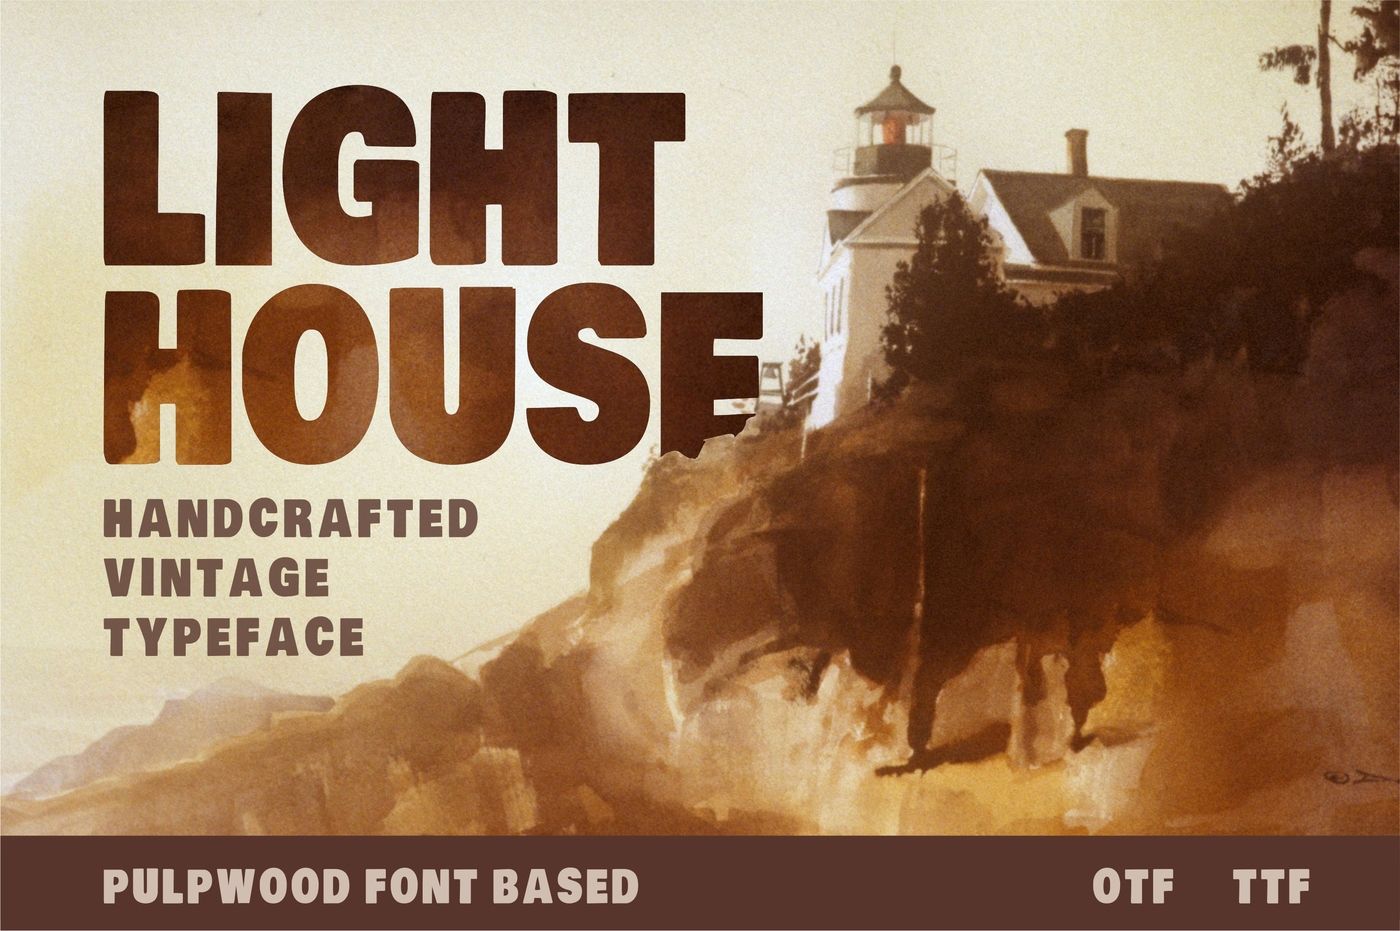 Lighthouse Handcrafted Pulpwood Font Based Typeface By Vintage Font Lab Thehungryjpeg Com